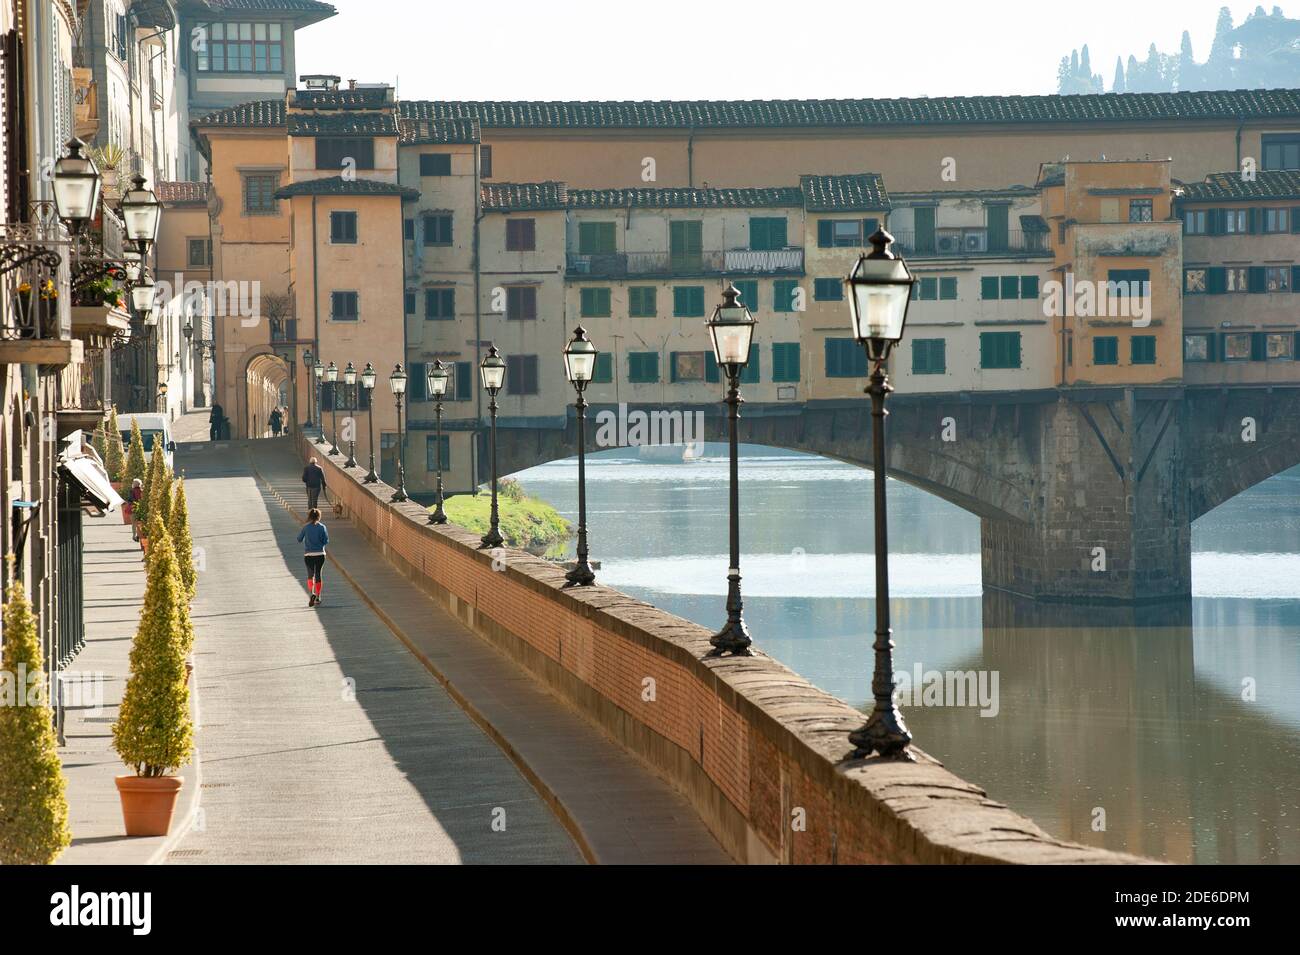 Florence, Italy - 2020, November 19: Very few people on Lungarno, during Covid-19 pandemic lockdown. Stock Photo